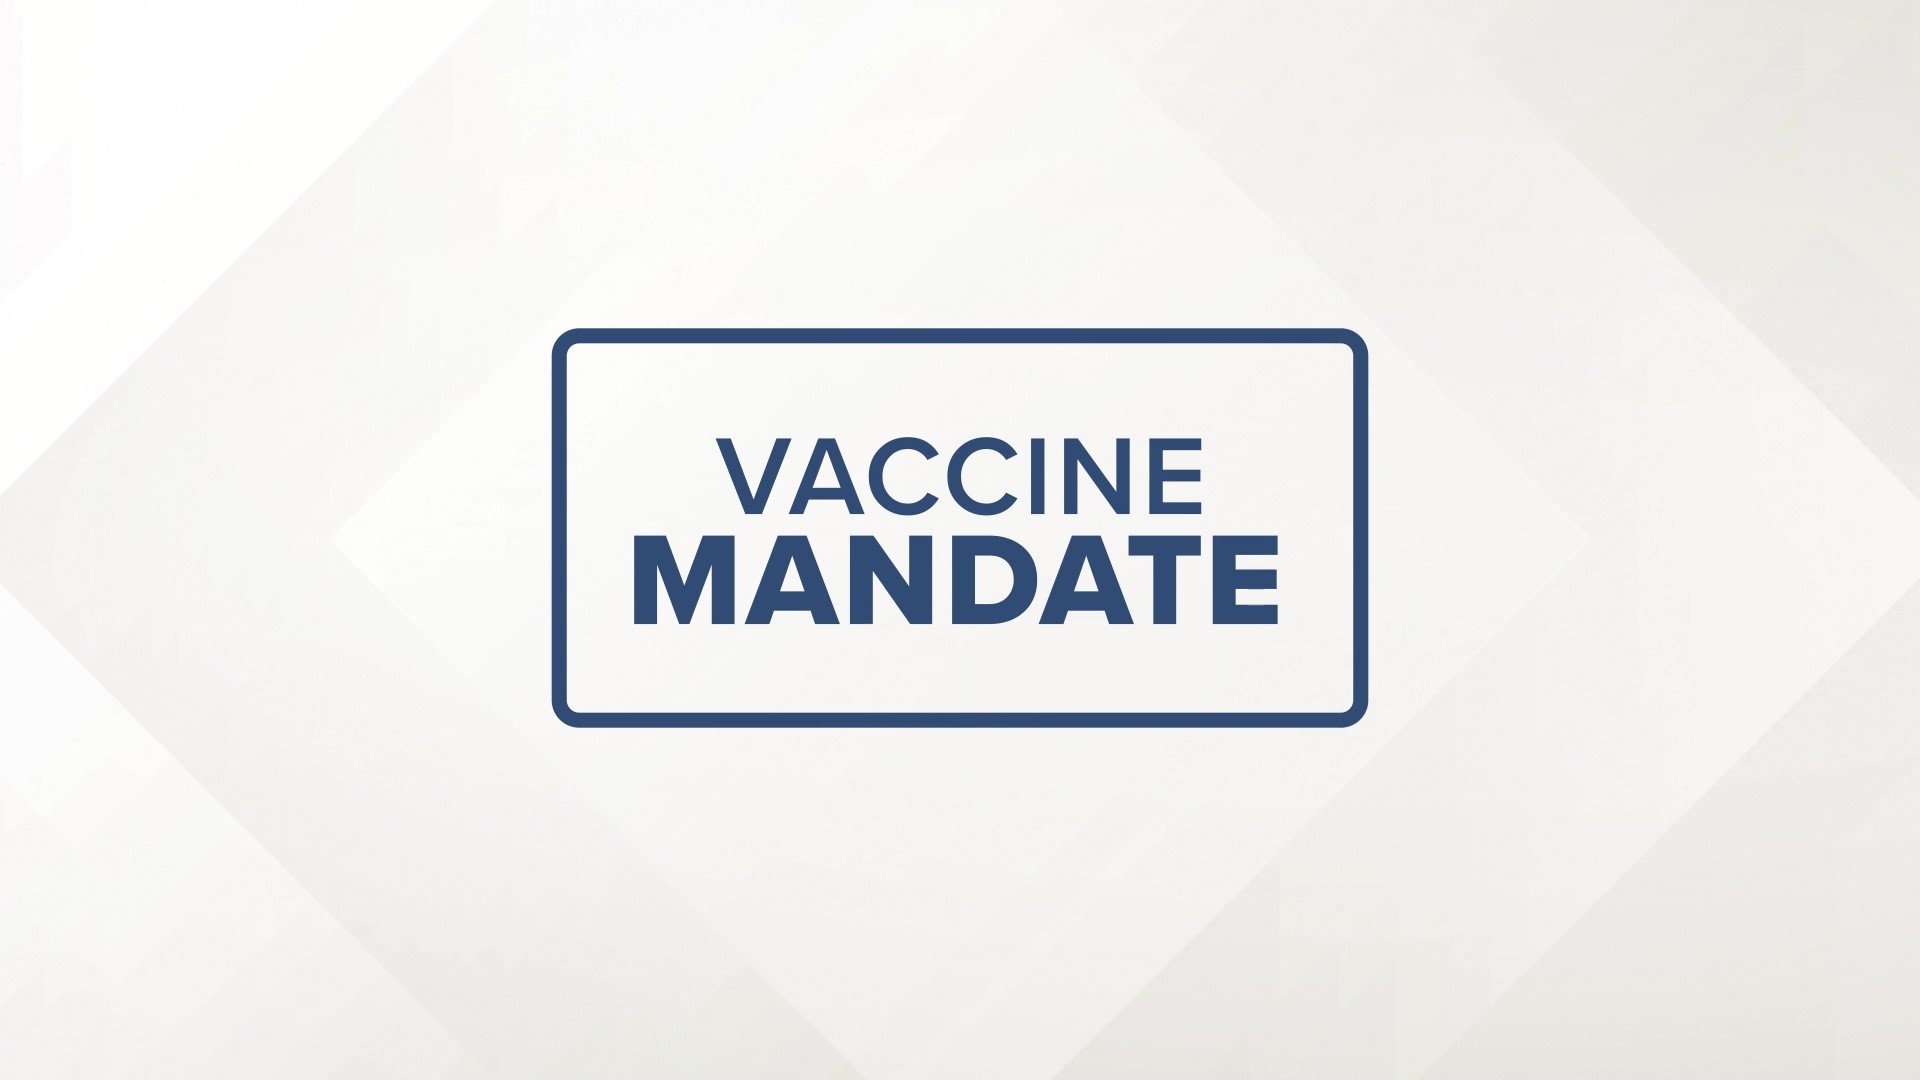 Sanofi Pasteur is enforcing a vaccine mandate that may cost hundreds of people their jobs next month. The company is a vaccine manufacturer.